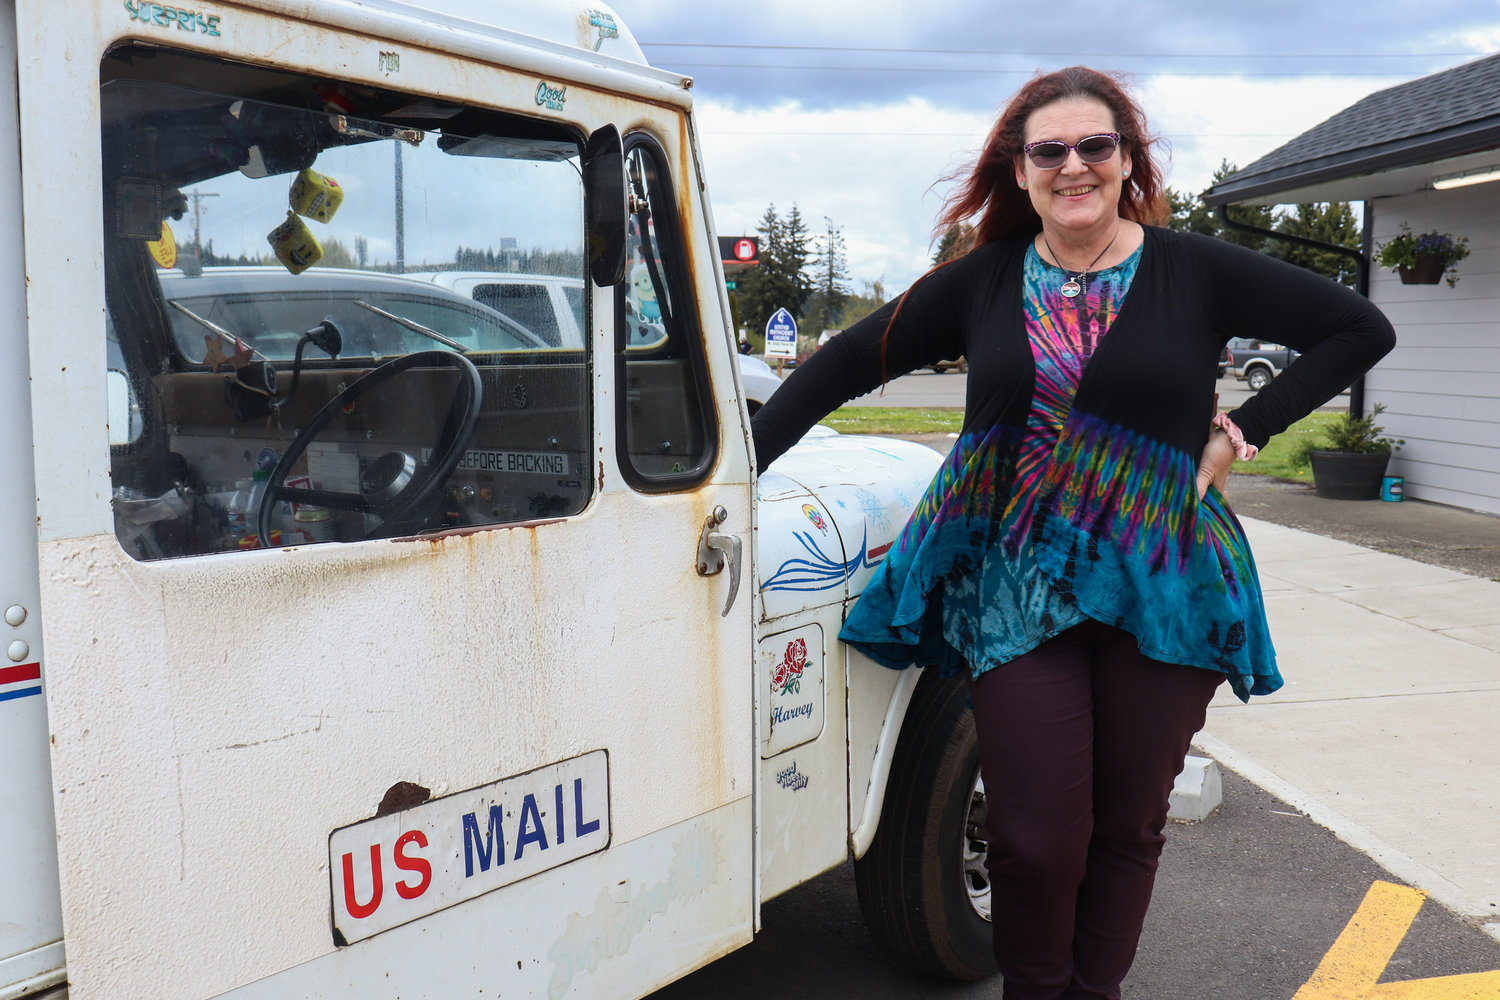 Lisa-Marie Wilson poses for a photograph beside one of her mail delivery vehicles in this photograph captured last week in Pe Ell.